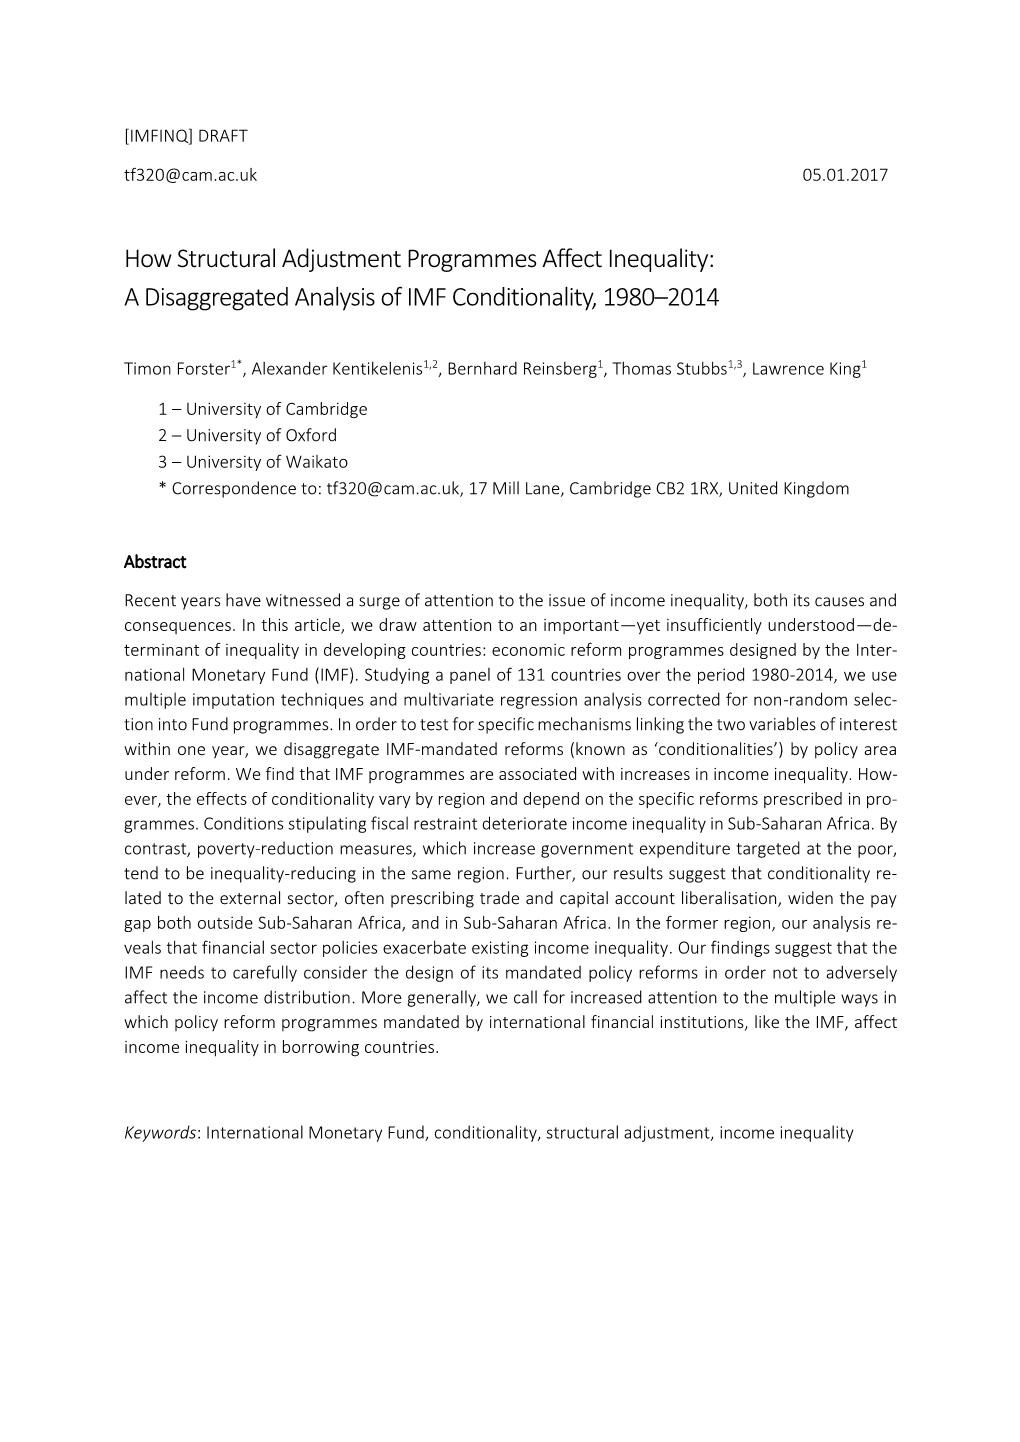 How Structural Adjustment Programmes Affect Inequality: a Disaggregated Analysis of IMF Conditionality, 1980–2014